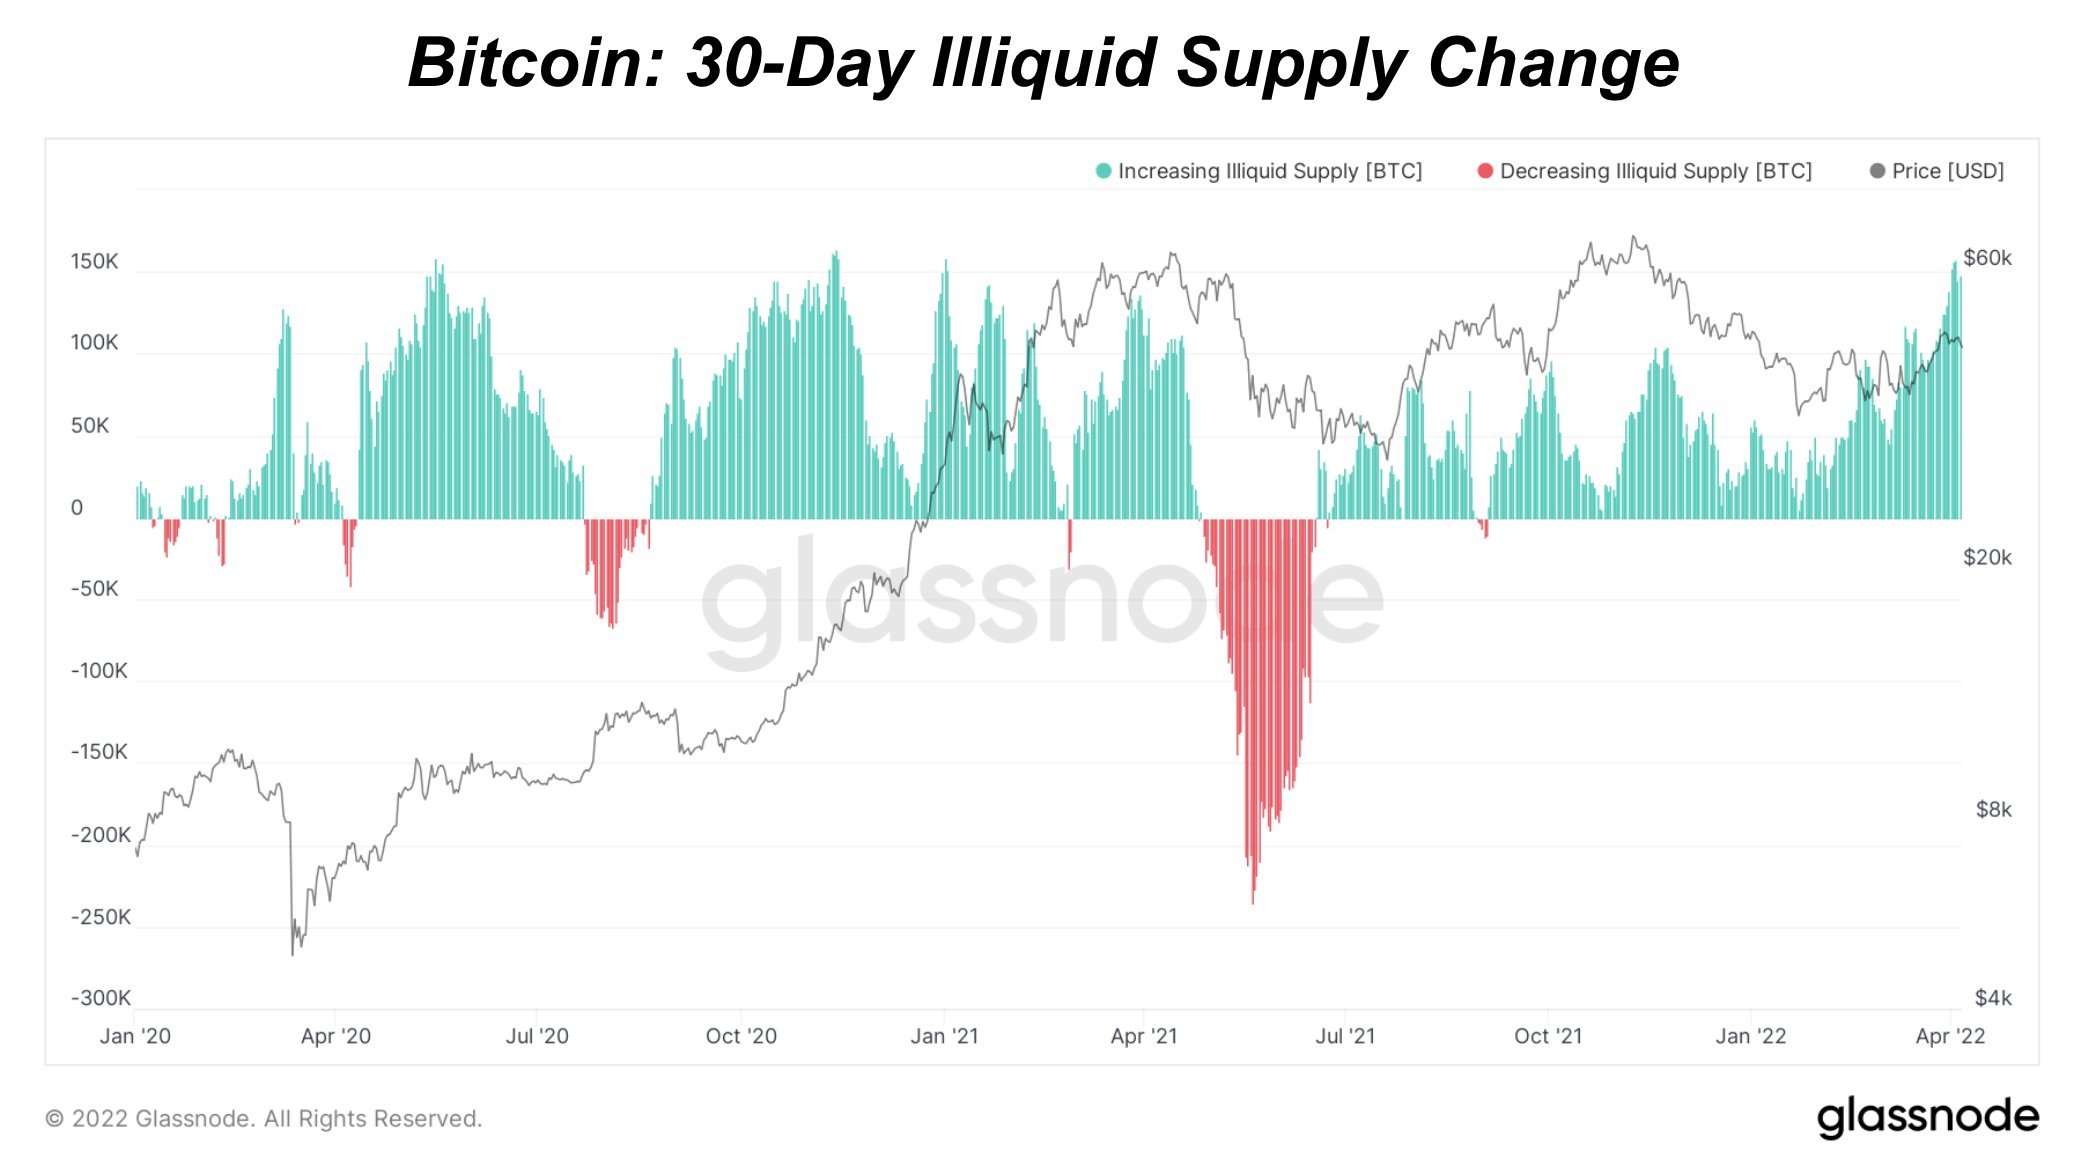 Market Research Report: Stocks and Crypto Fall on Rate Fears, USD Rallies While Oil Dips On IEA Reserve Release - BTC 30 day illiquid supply change